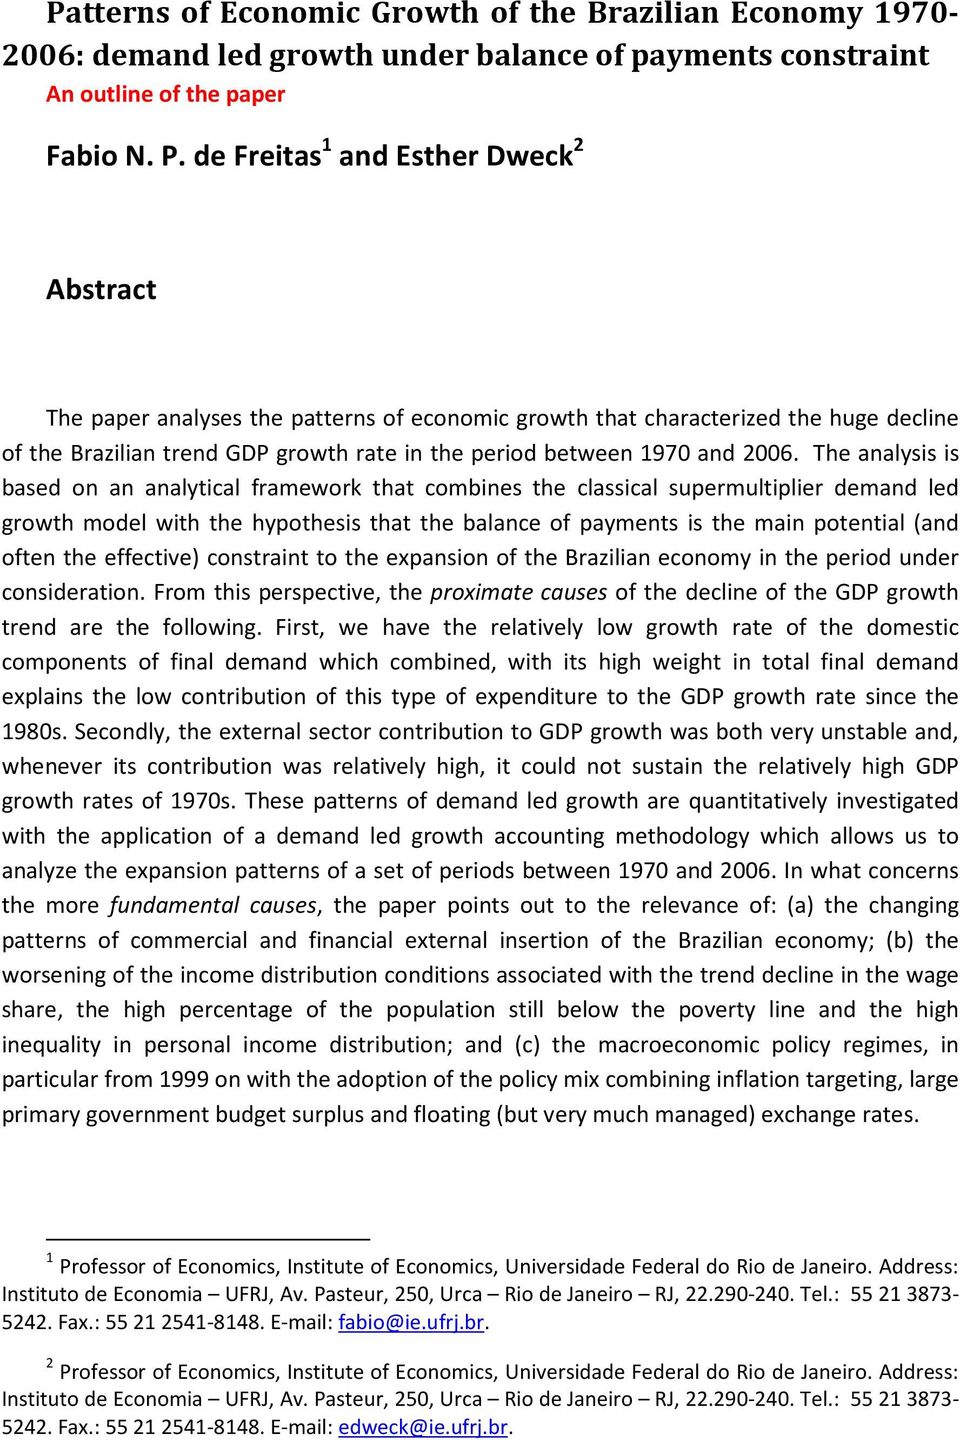 The analysis is based on an analytical framework that combines the classical supermultiplier demand led growth model with the hypothesis that the balance of payments is the main potential (and often